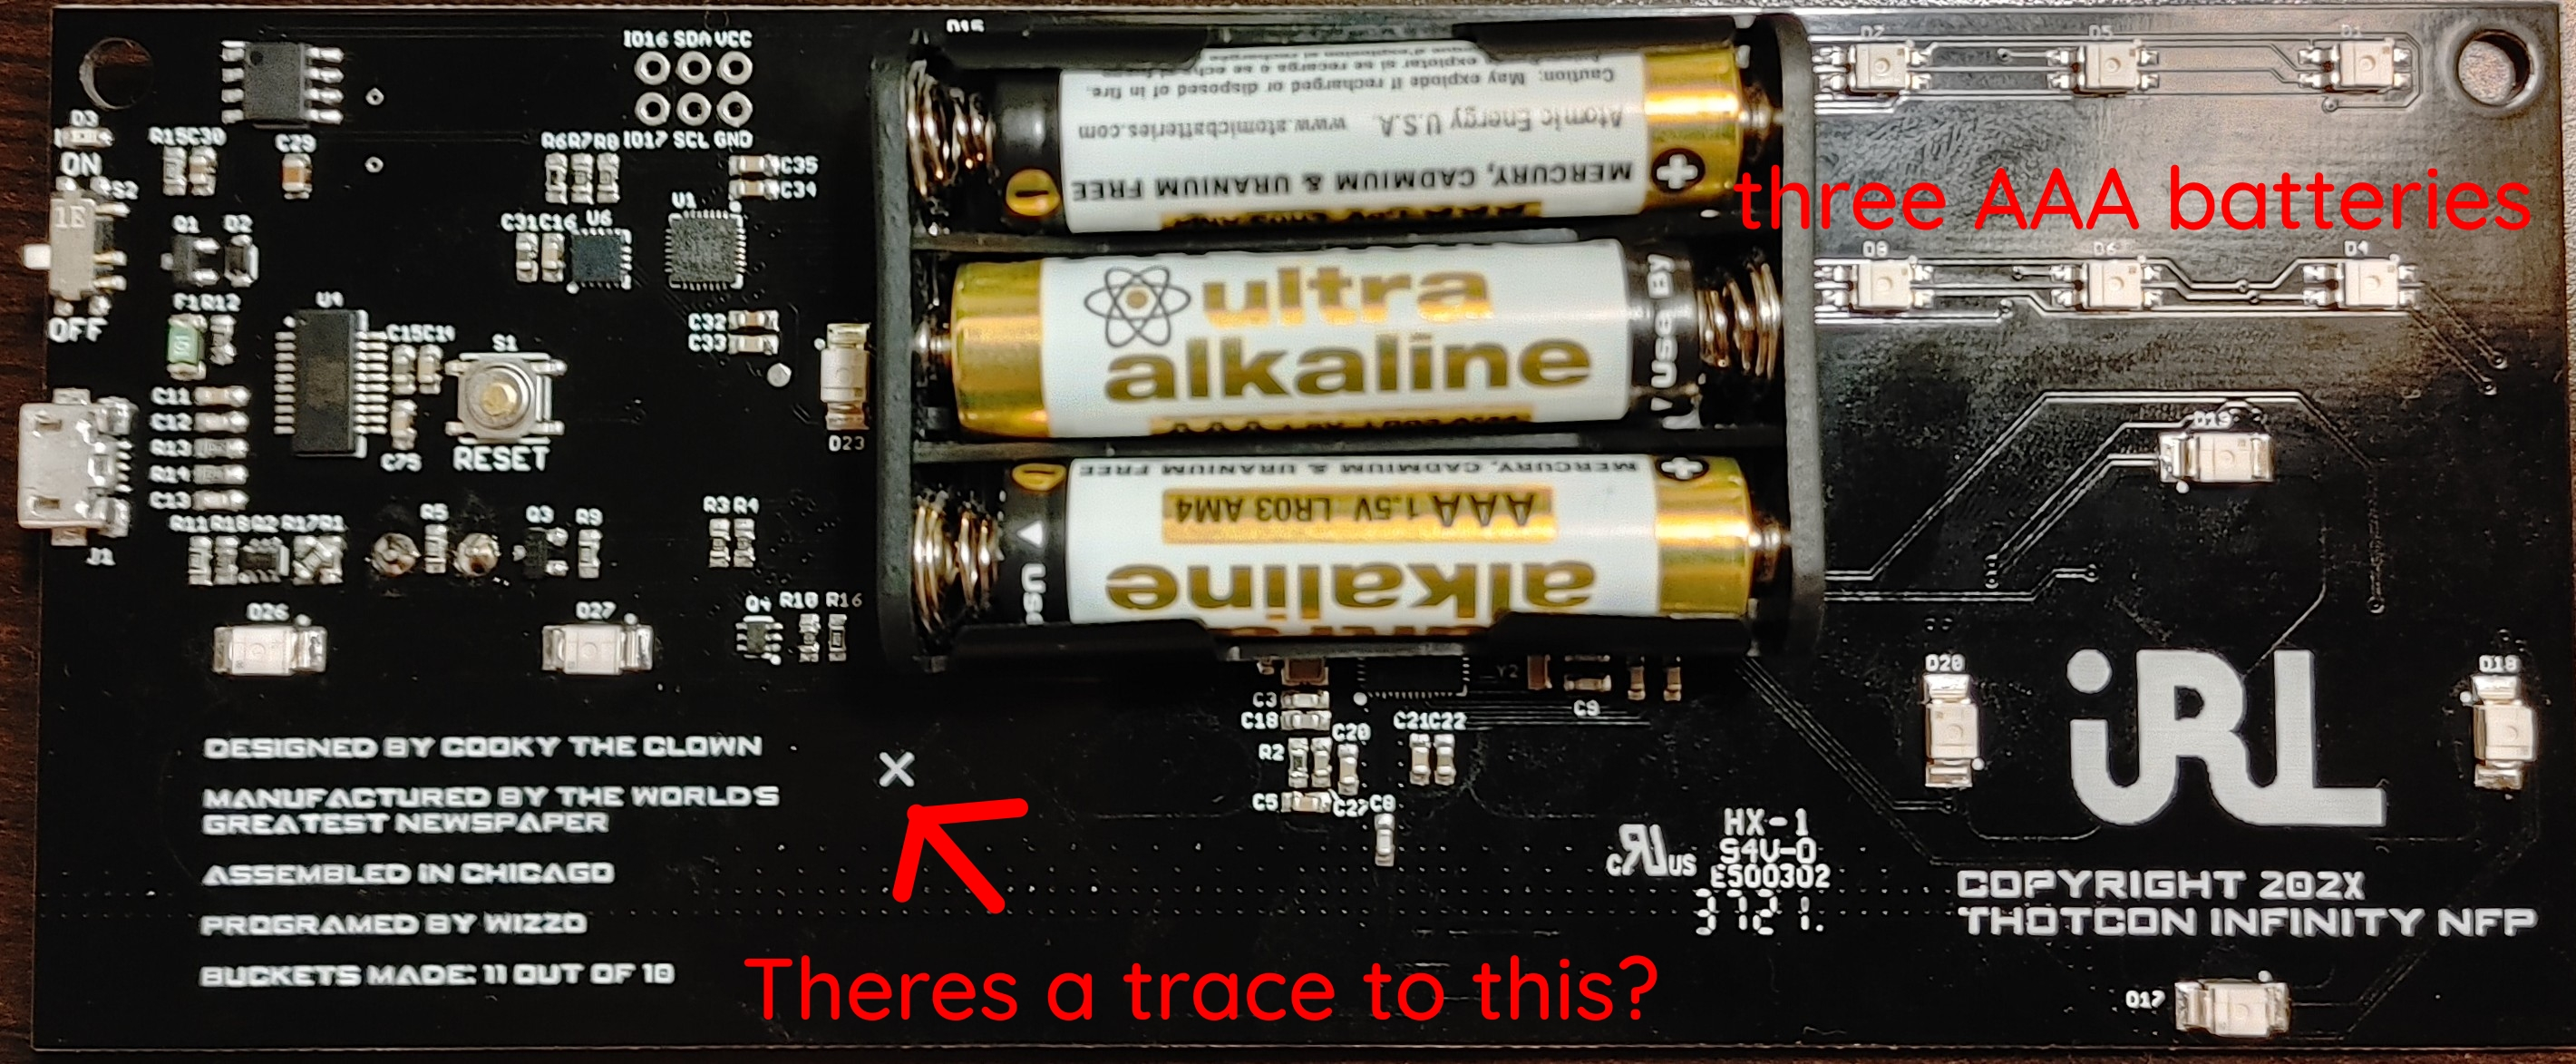 An annotated view of the back side of the badge. It has all of the components, including power from three triple-a batteries, as well as some humorous attributions such as "Manufactured by the worlds greatest newspaper" The highlighted locations include a resistor that has been bridged on top of two other surface mount resistors, and an X symbol that seems to have a trace under it that leads to nowhere.